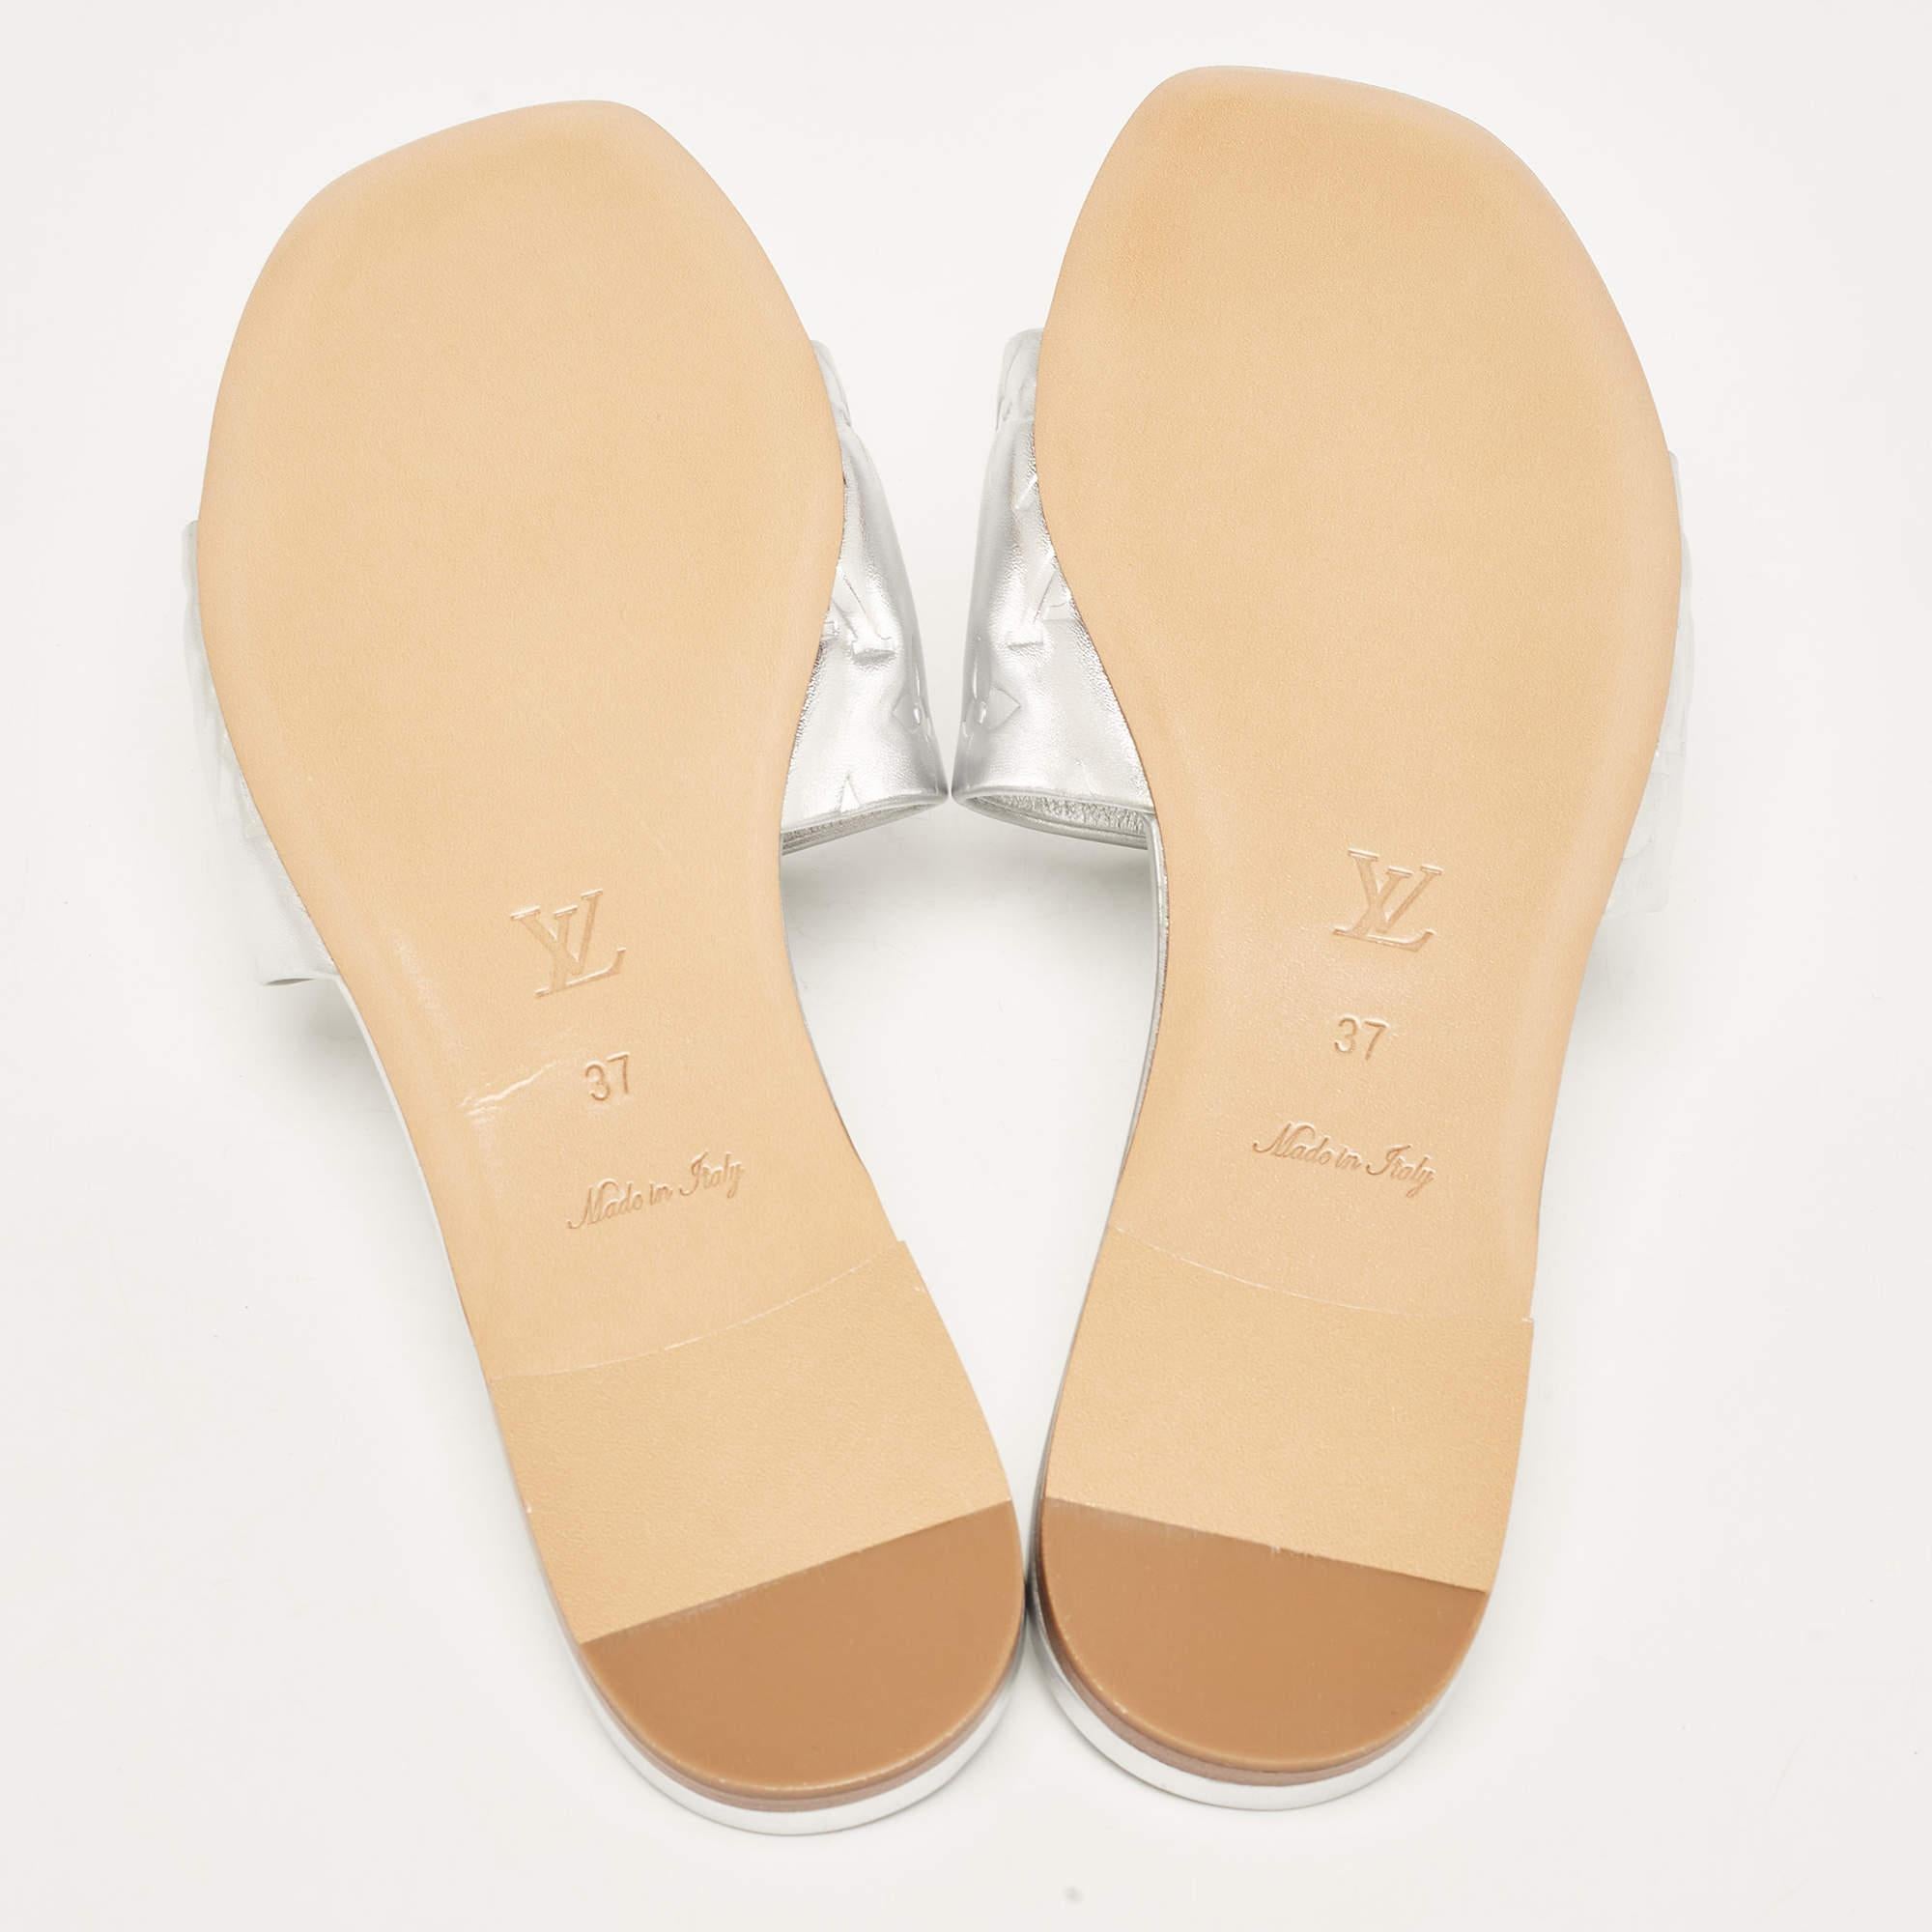 Enhance your casual looks with a touch of high style with these designer slides. 1